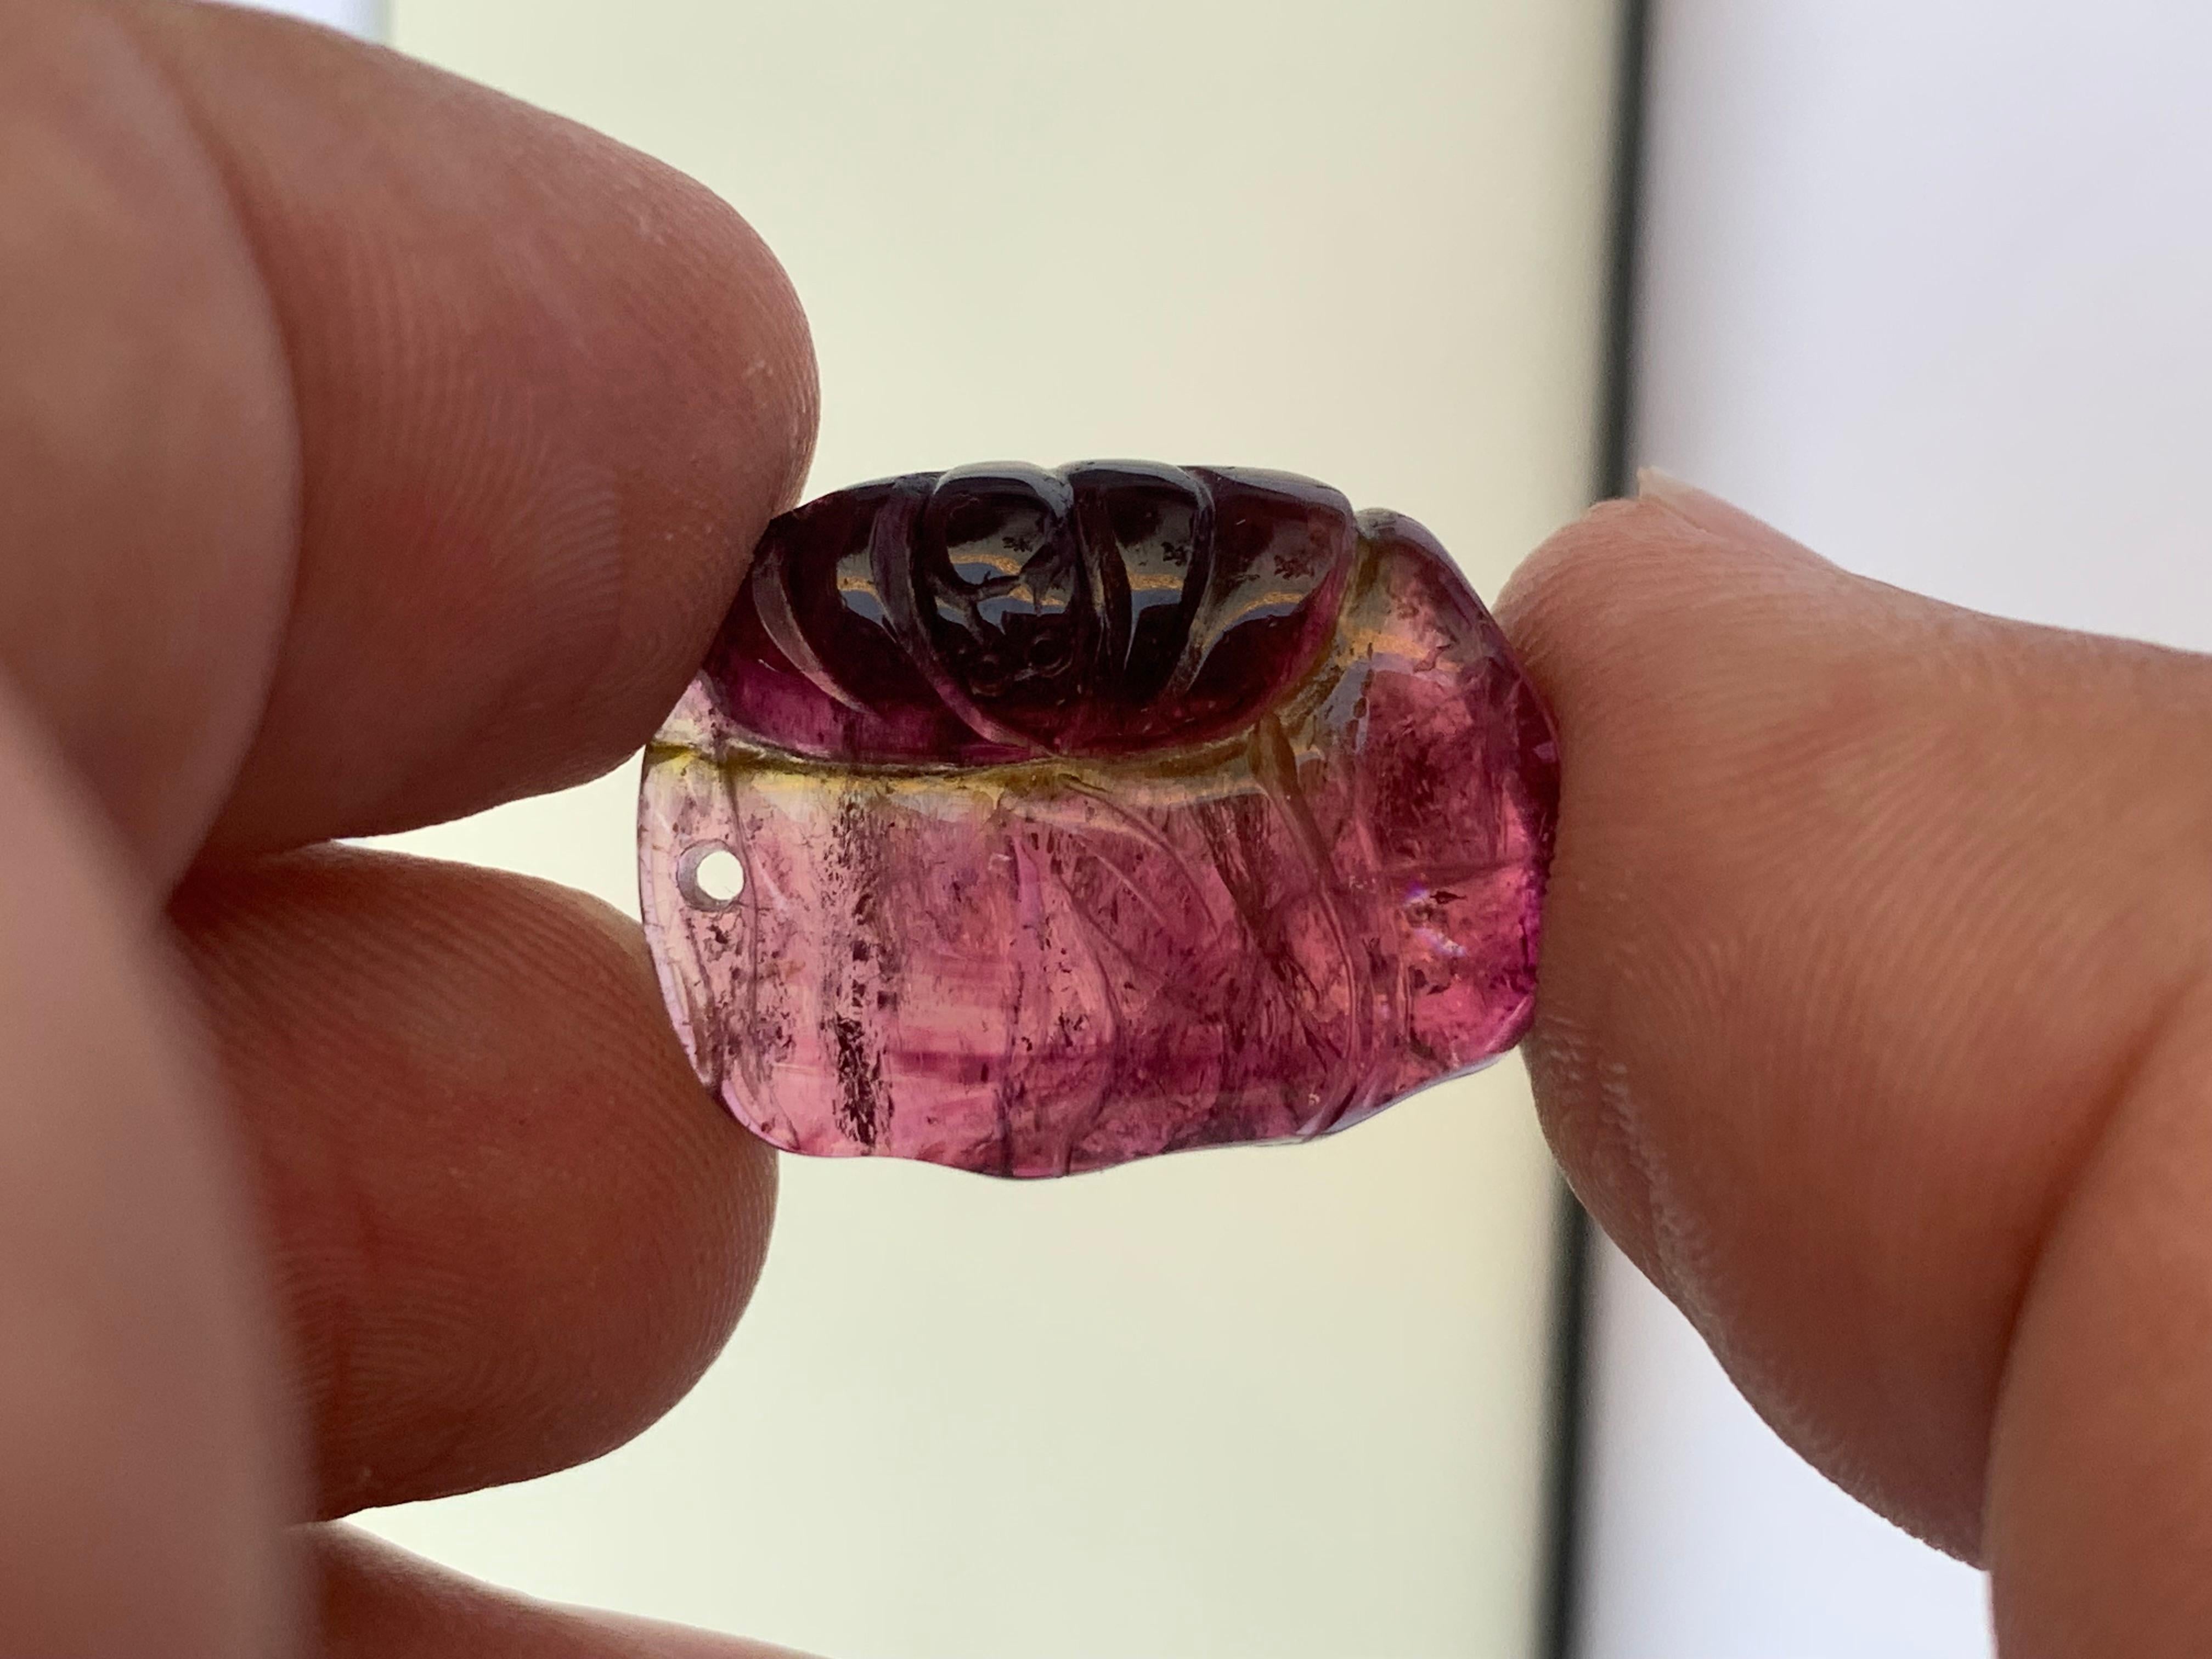 Malagasy 23.85 Carat Stunning Loose Tri Color Tourmaline Drilled Carving from Afghanistan